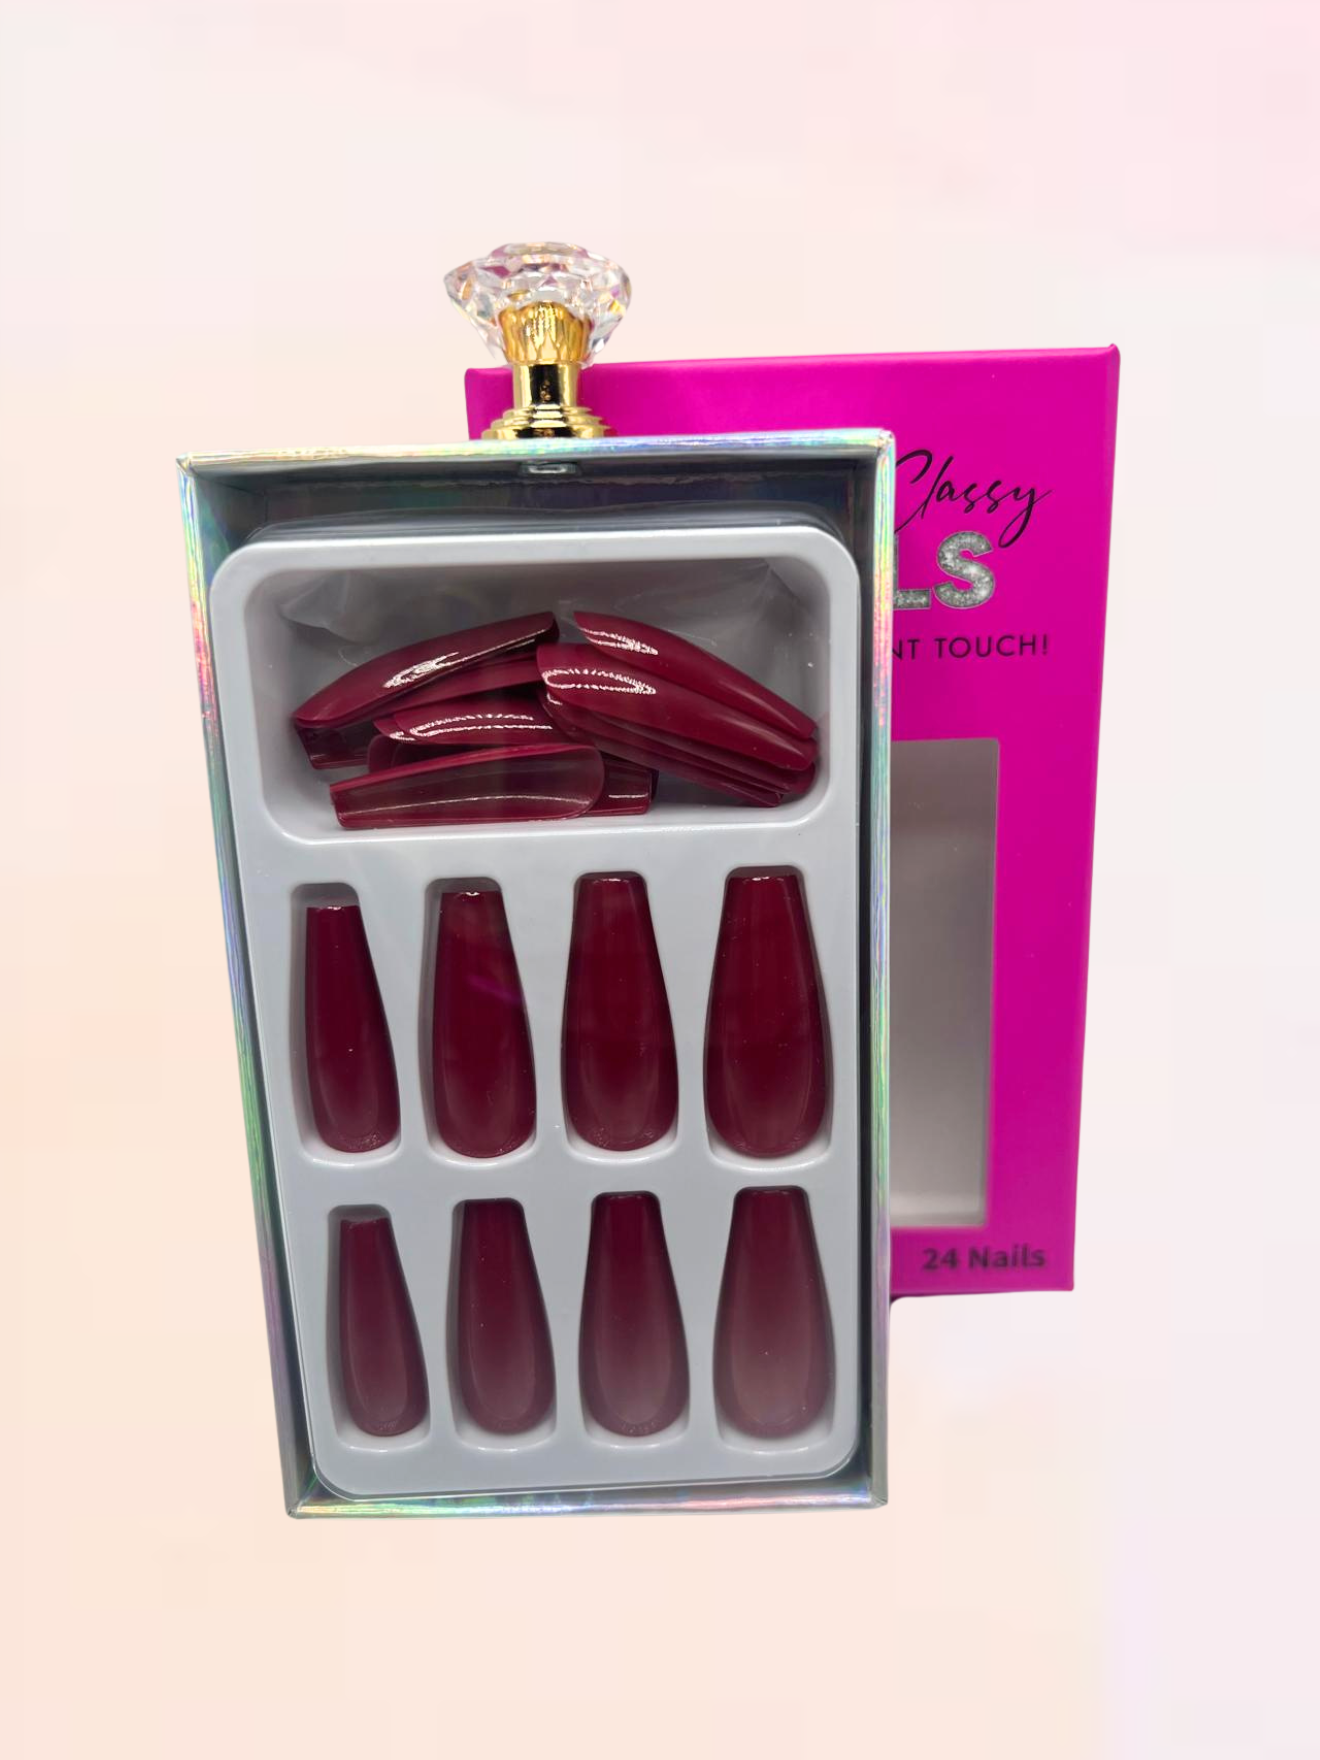 Red Wine Glossy Burgundy Coffin Press-On Nails